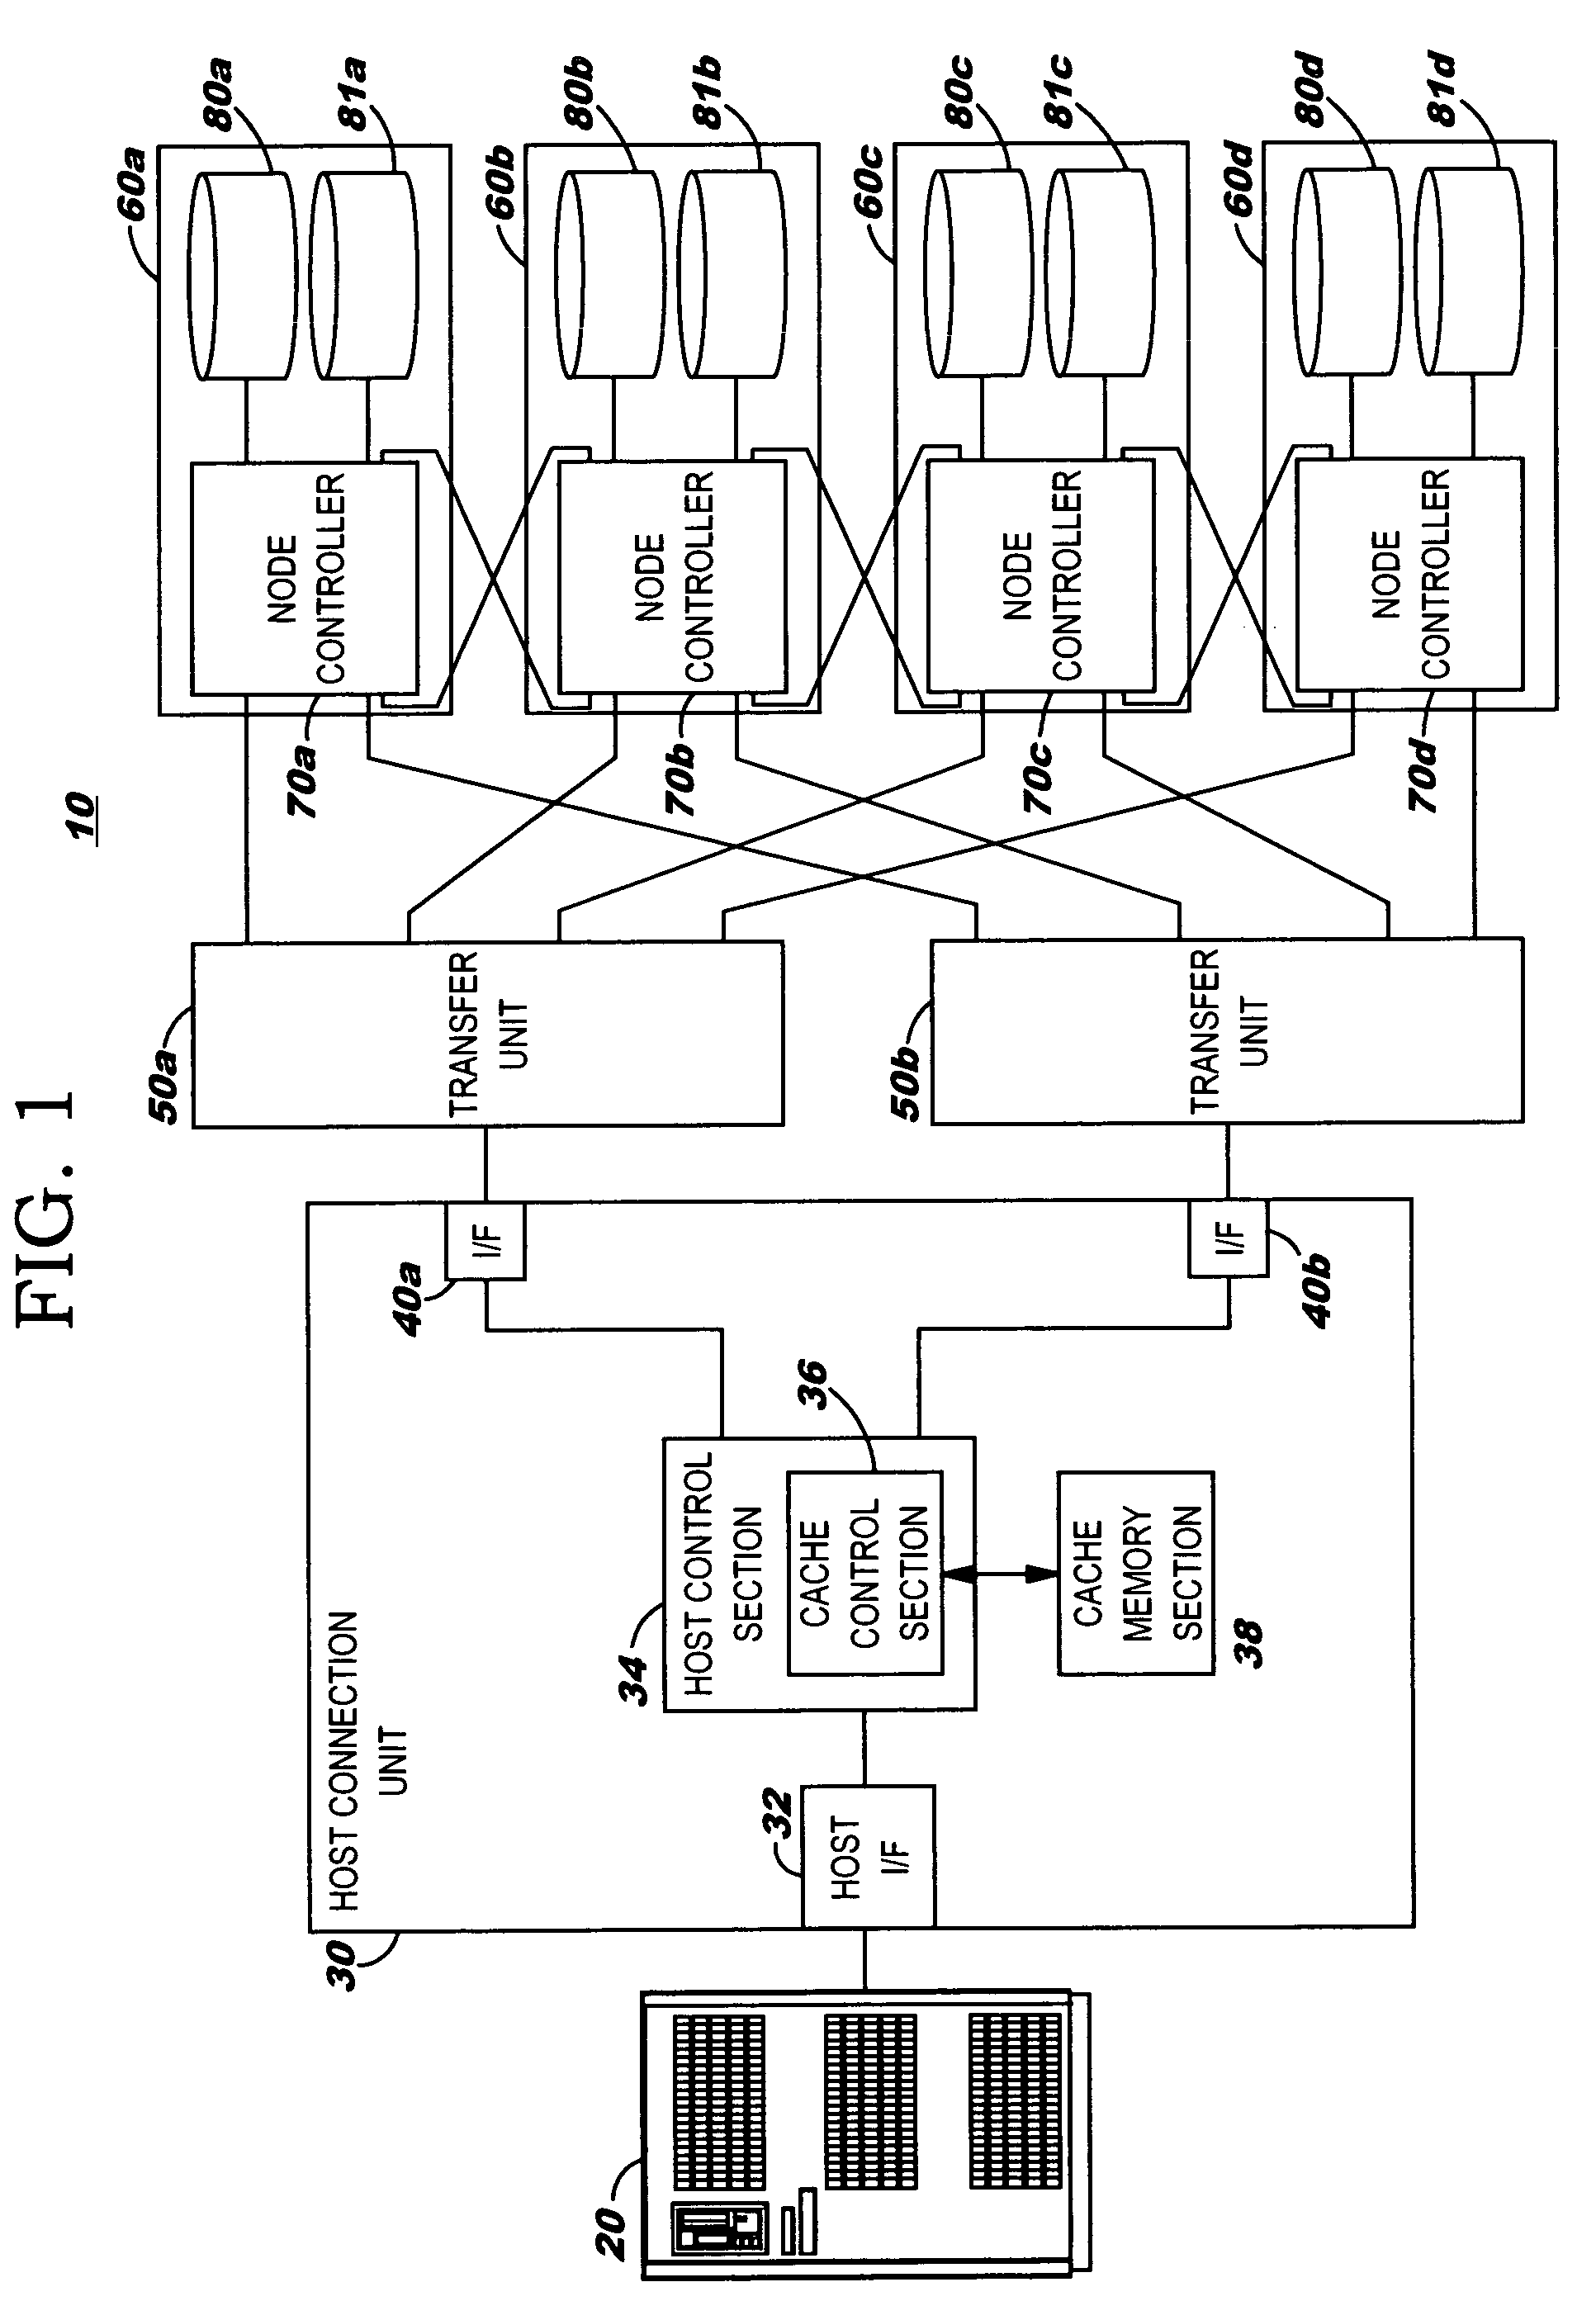 Storage system, controller, control method and program product therefor